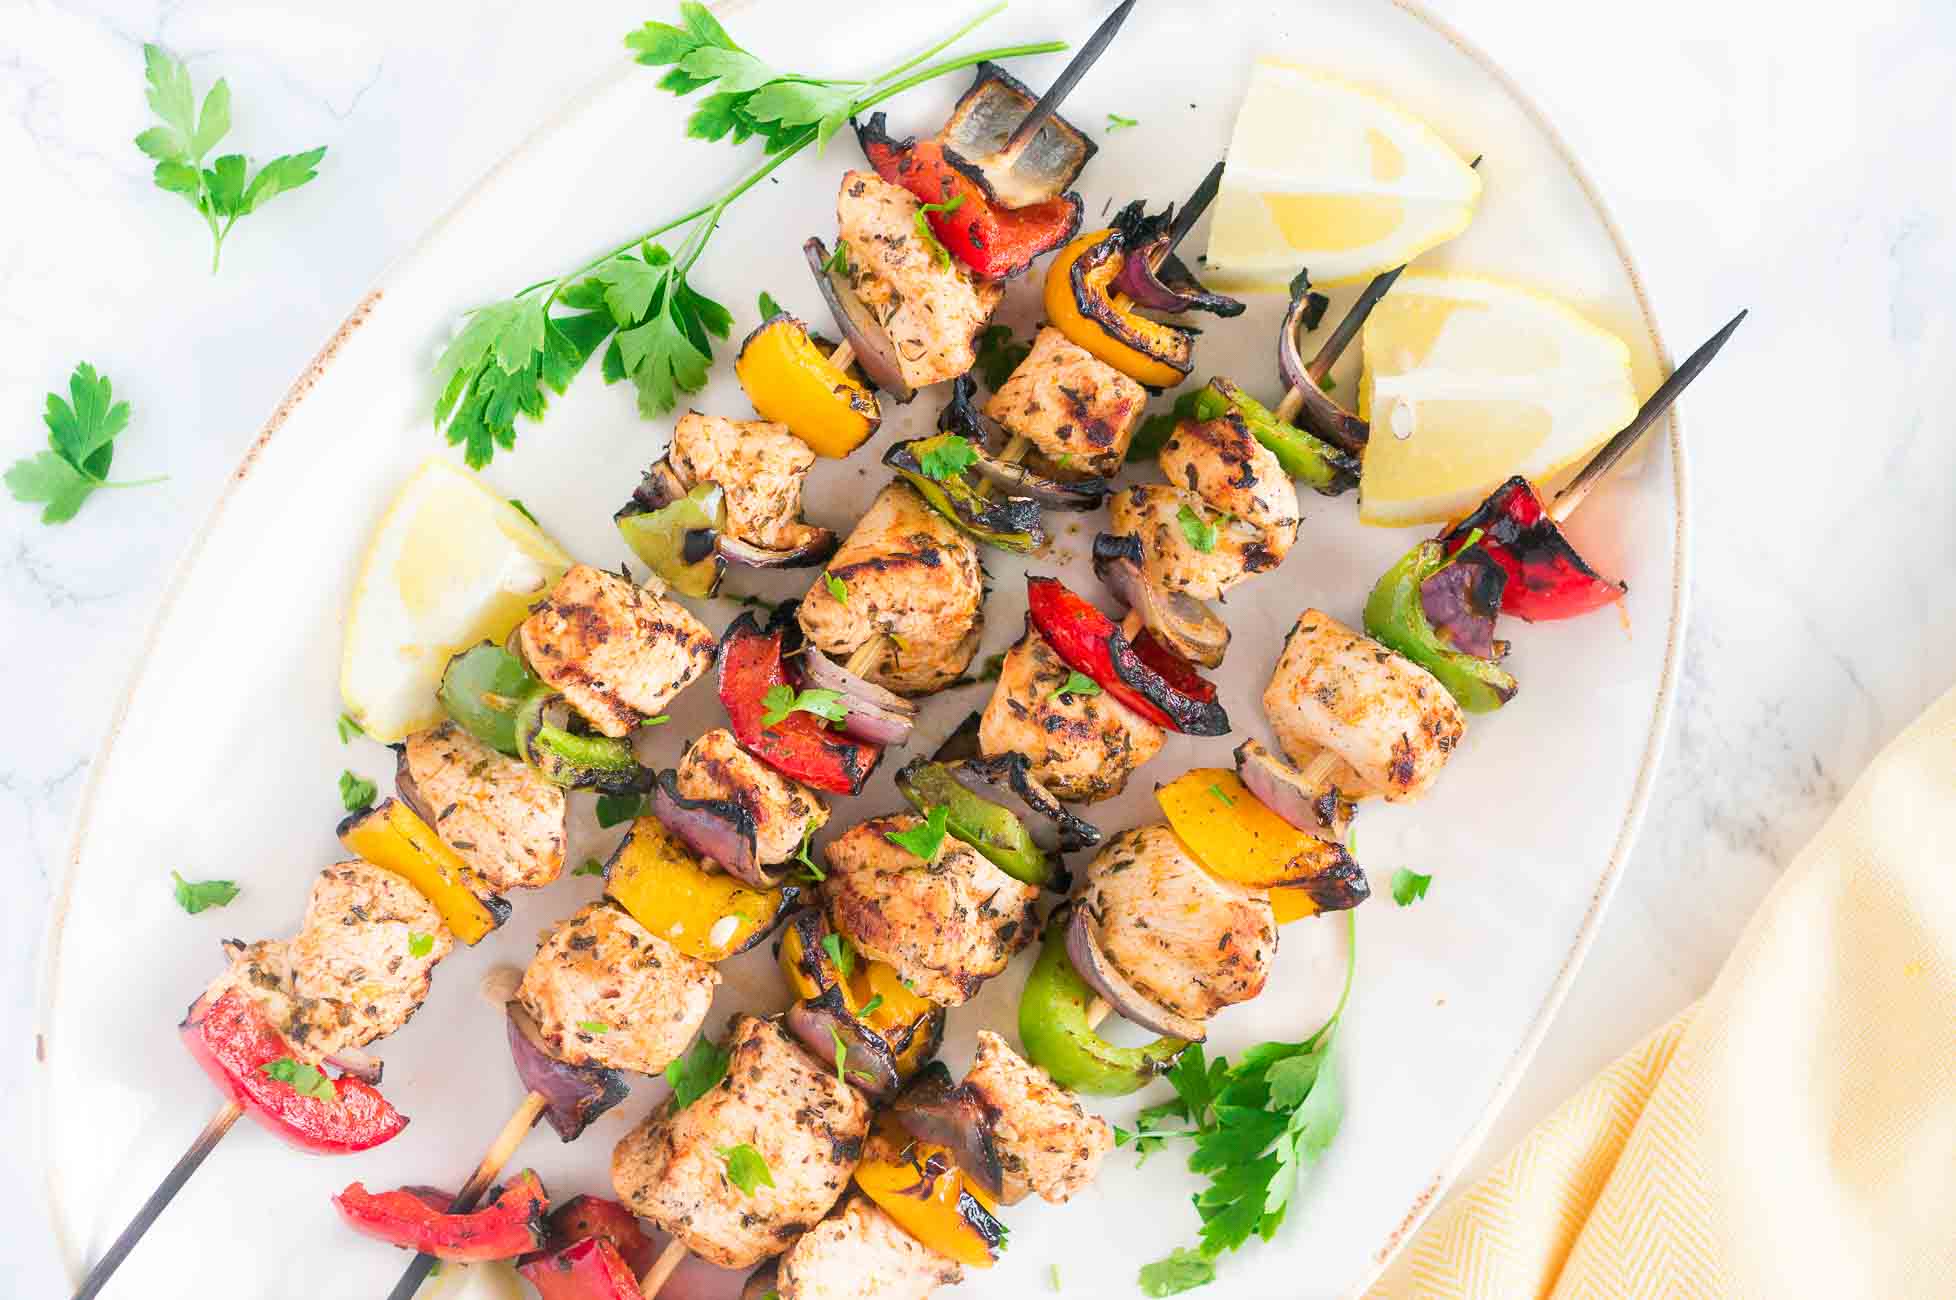 health and wellness mentor, coach and champion grilled chicken kebabs